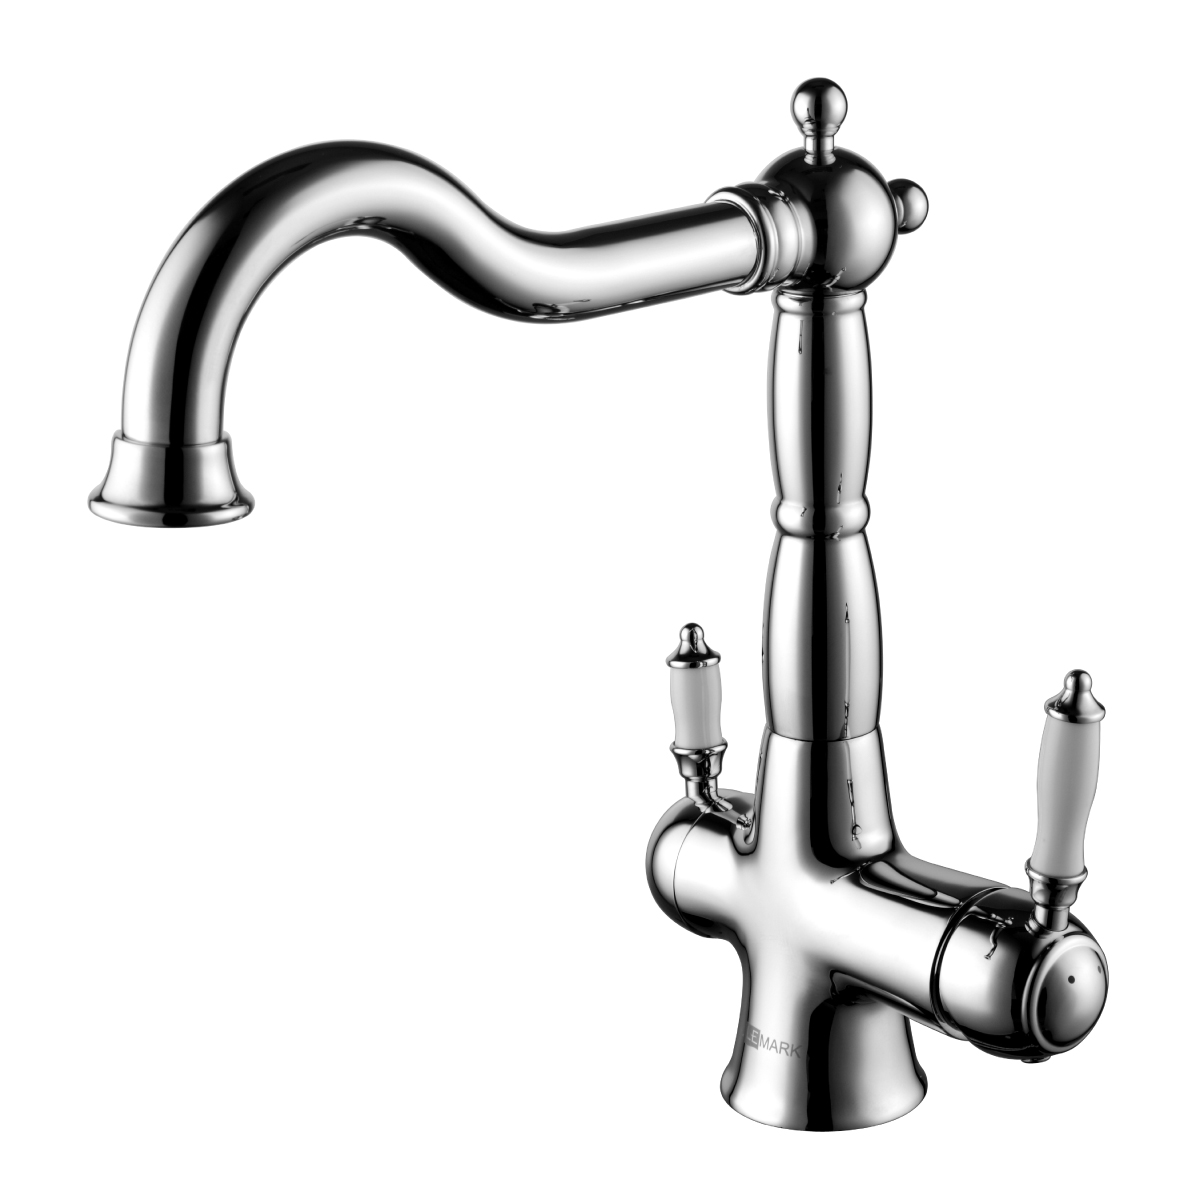 LM3065C Kitchen faucet
with connection to drinking 
water supply